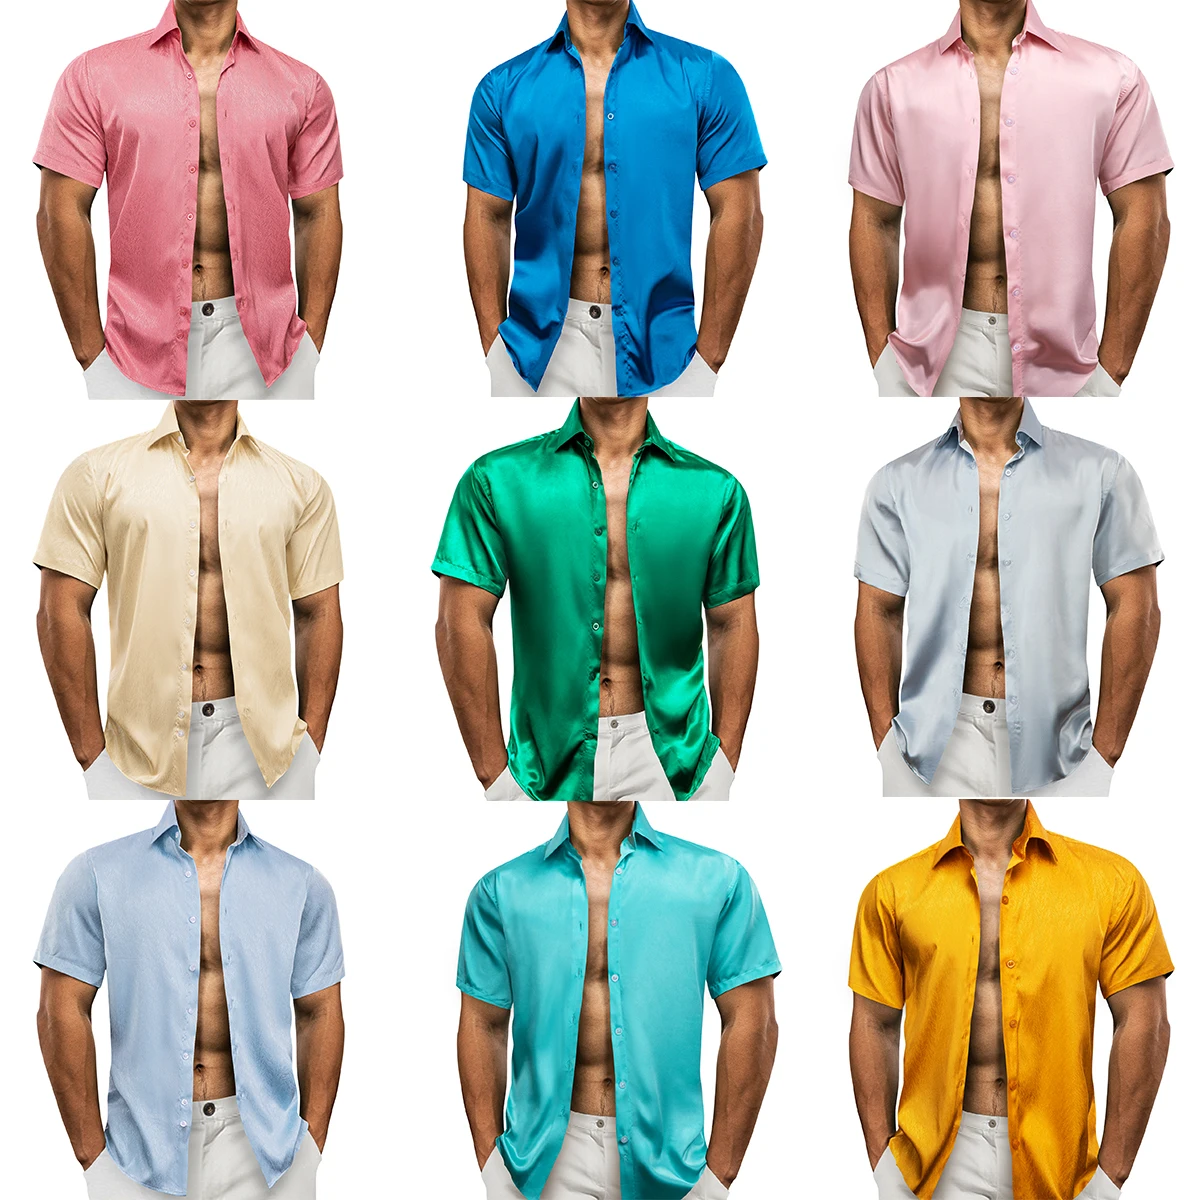 

Barry Wang Short Sleeeve Shirts for Men Summer Silk Solid Satin Silver Gold Teal Red White Black Green Blue Pink Slim Fit